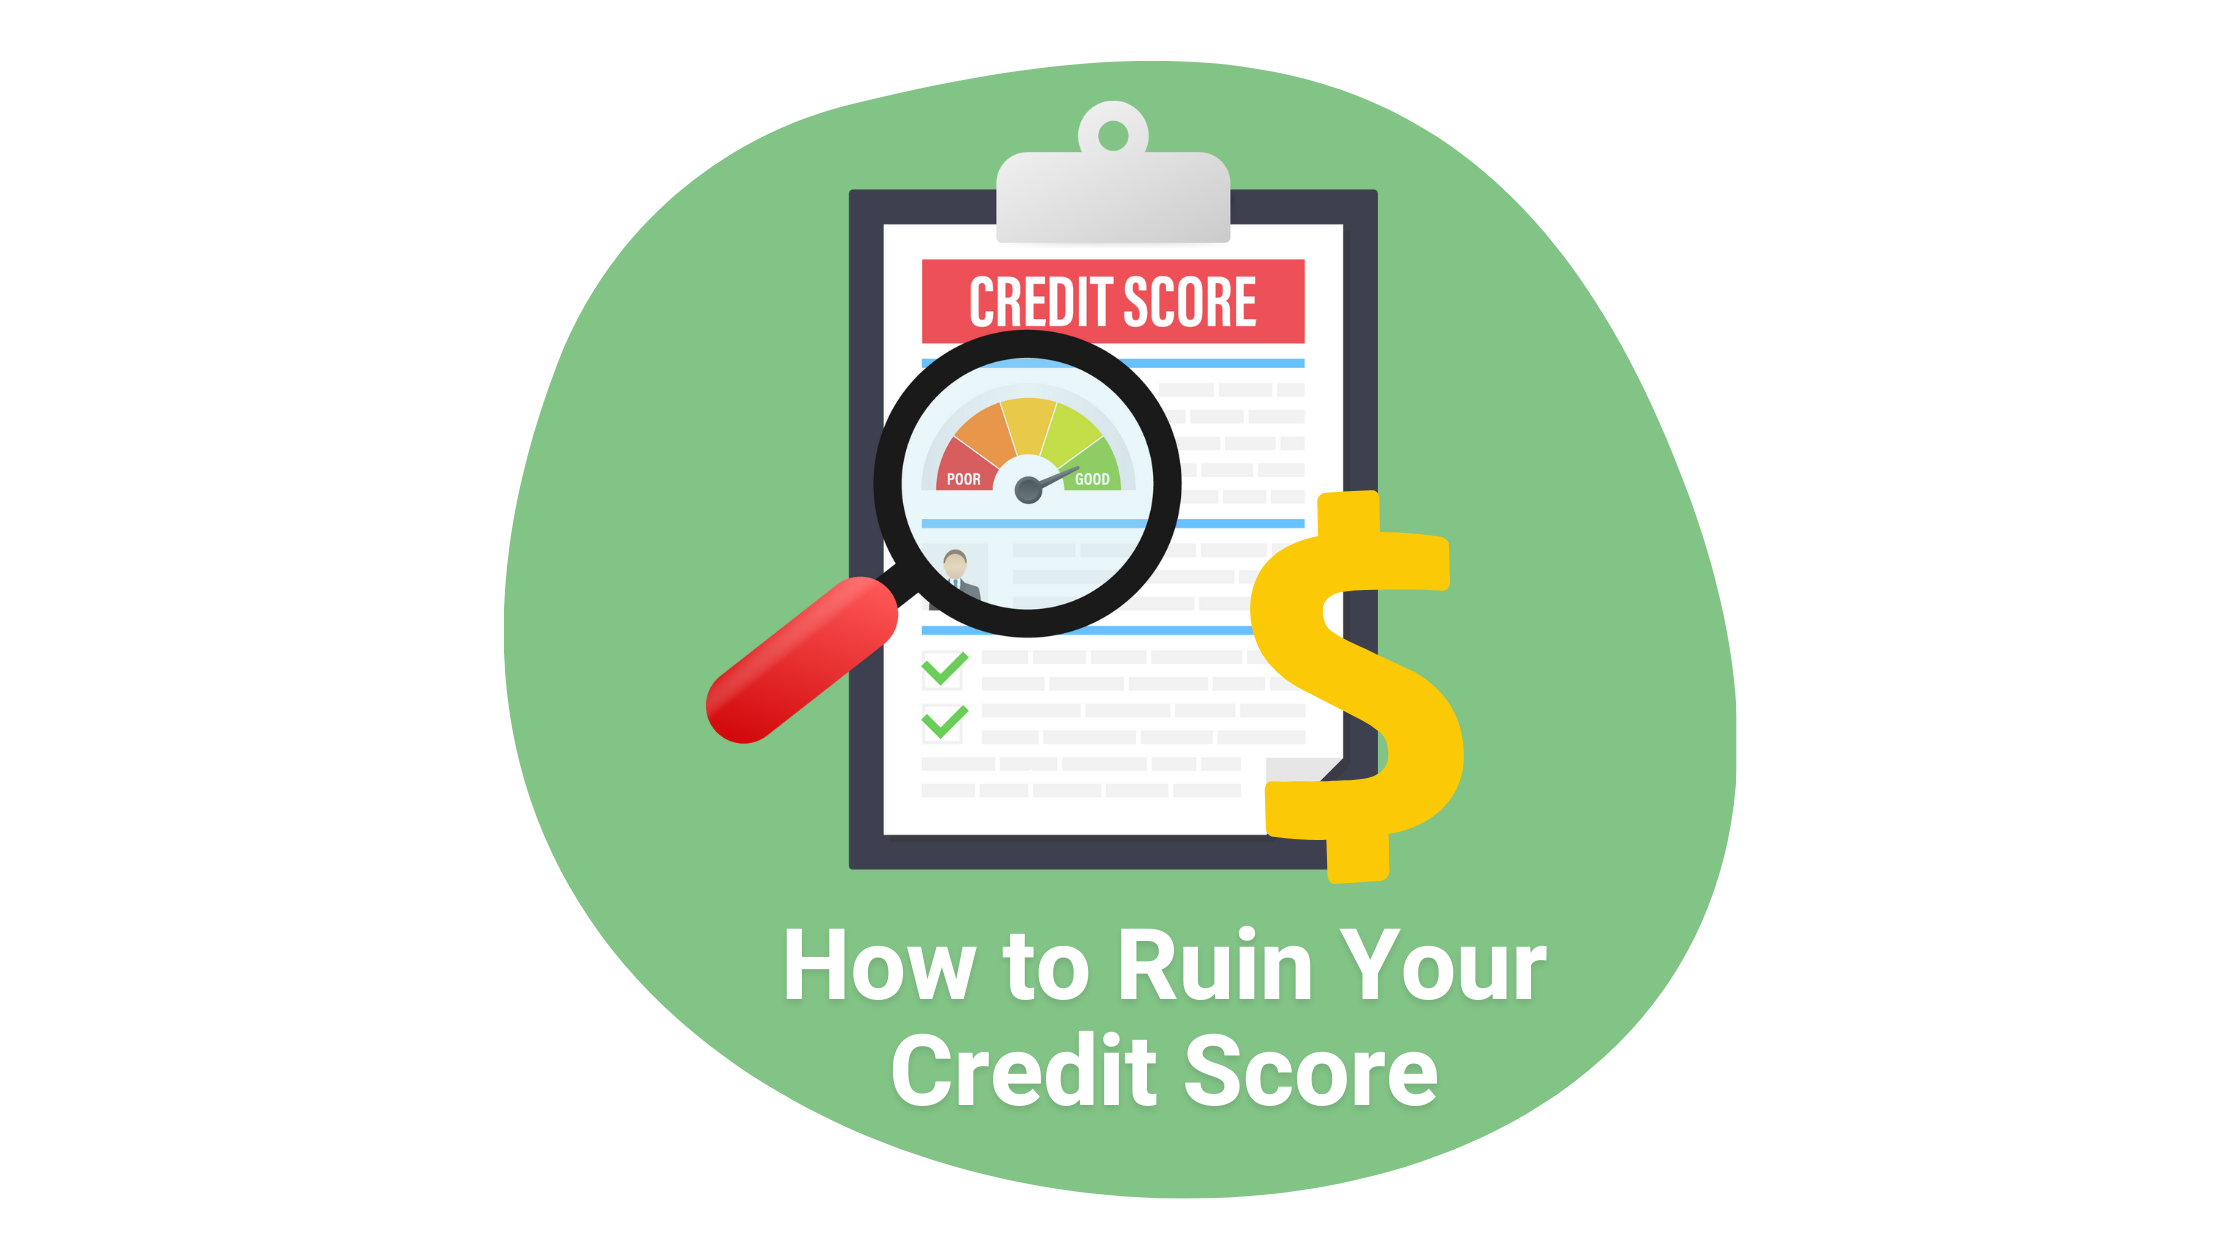 7 Ways To Ruin Your Credit Score: Factors That Affect Your Credit